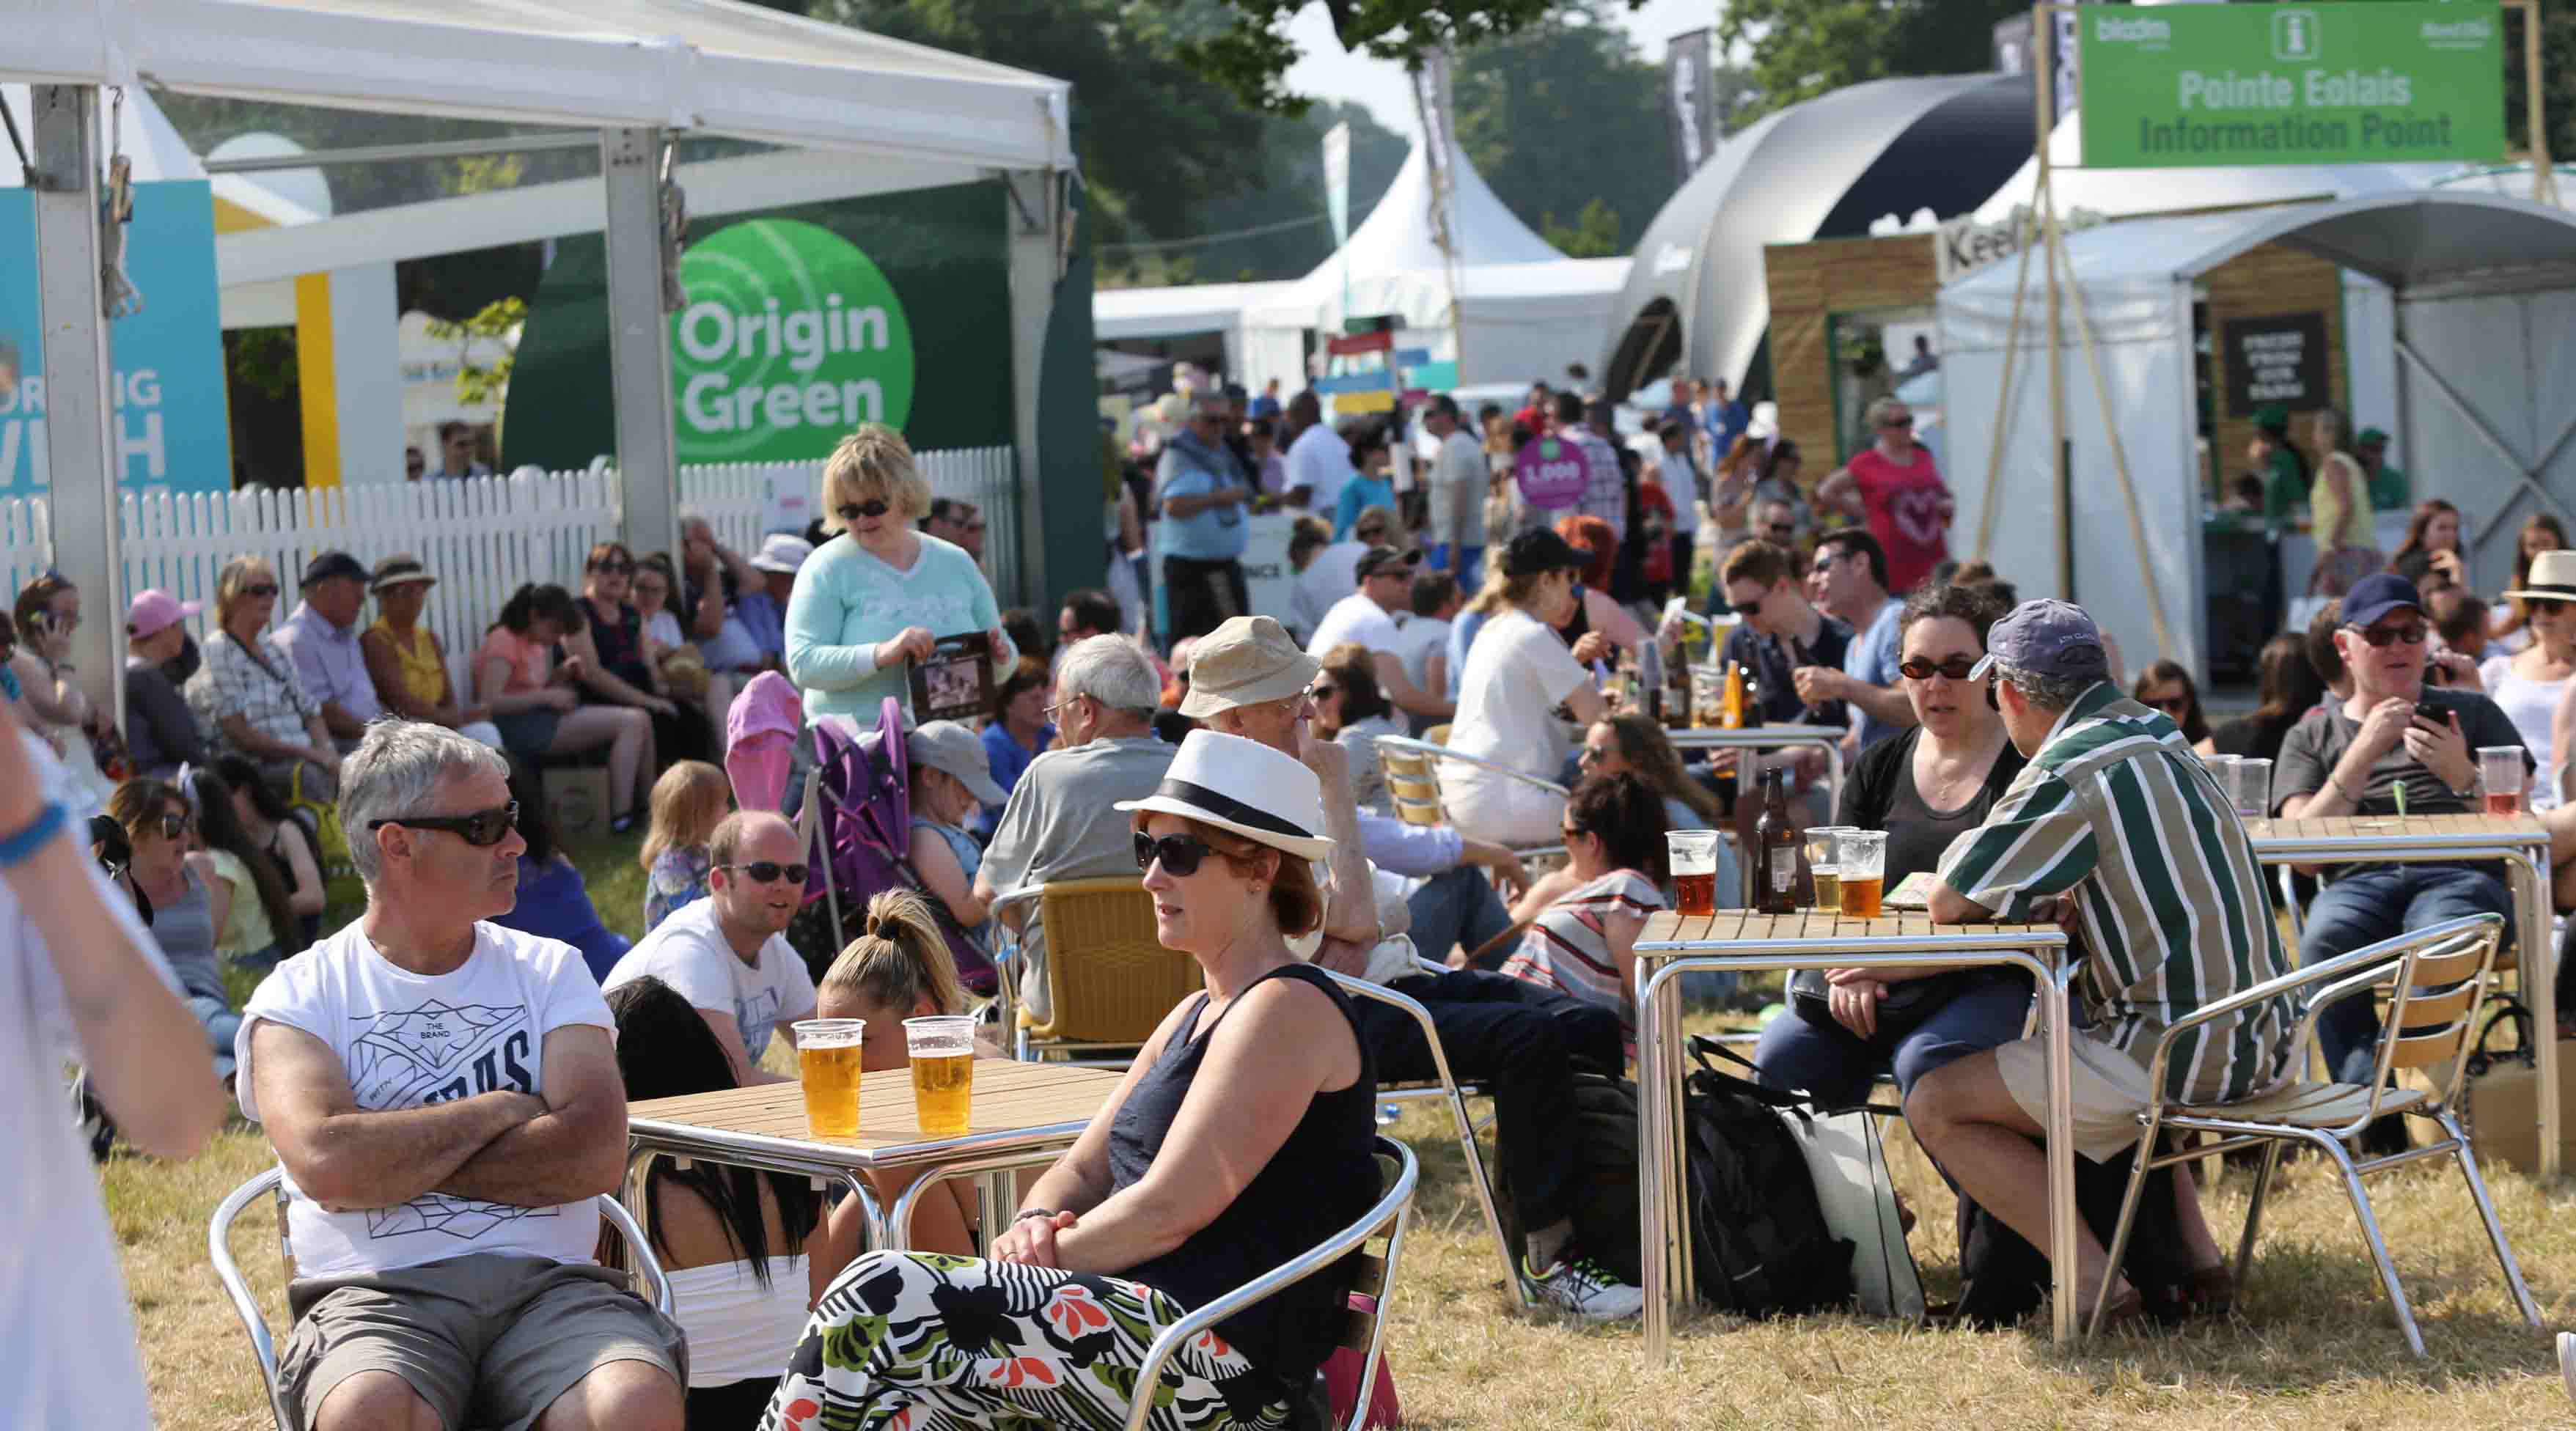 Almost 115,000 people attended Bord Bia’s Bloom festival in the Phoenix Park, Dublin, over the June Bank Holiday weekend - a record attendance.